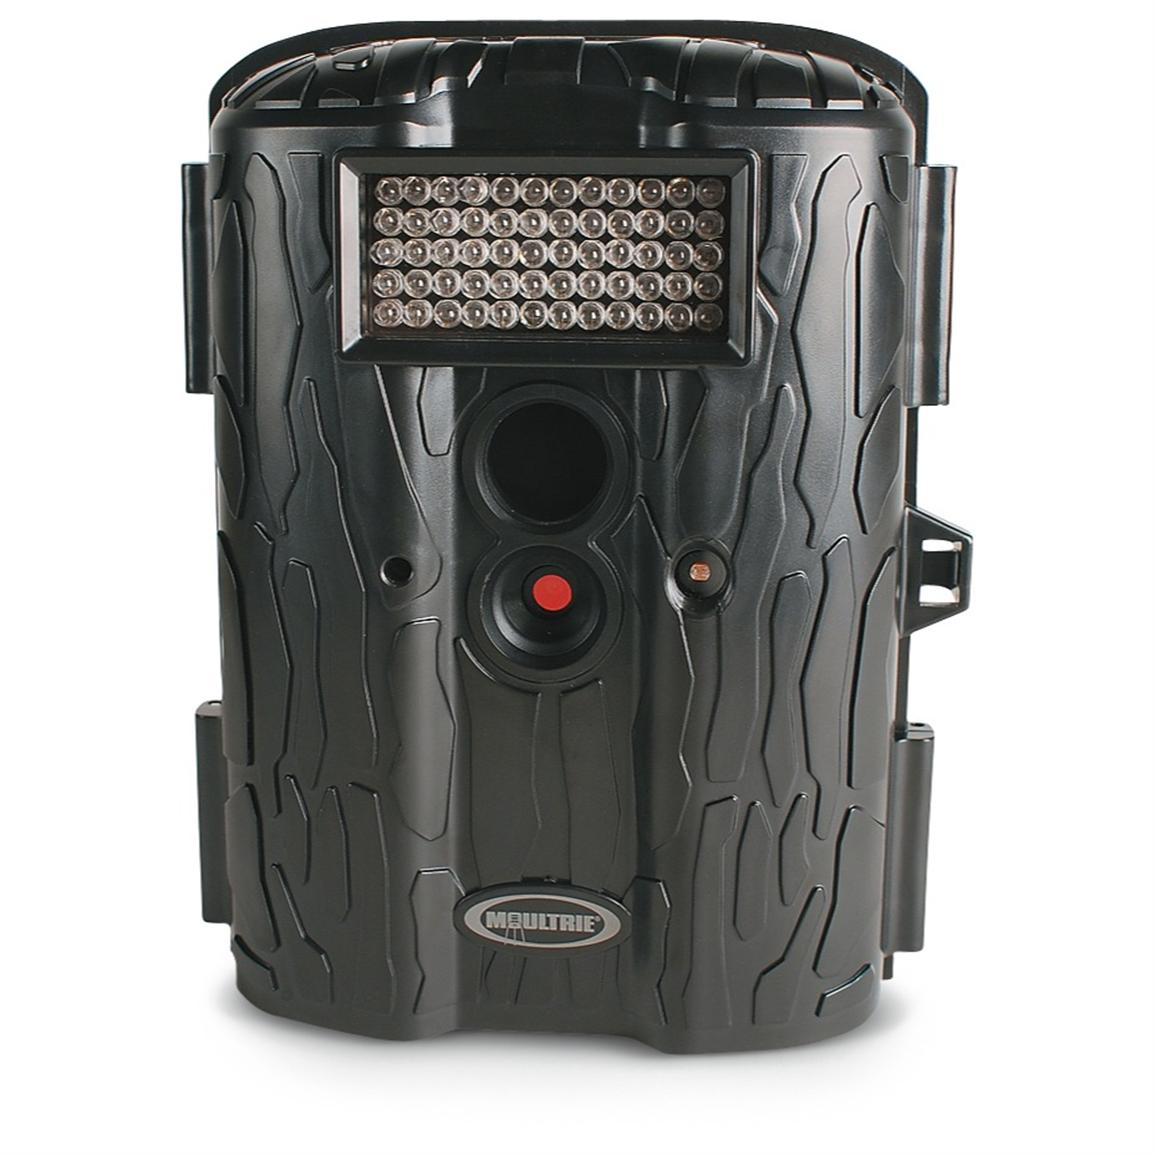 moultrie-i-40xt-game-spy-trail-camera-203159-game-trail-cameras